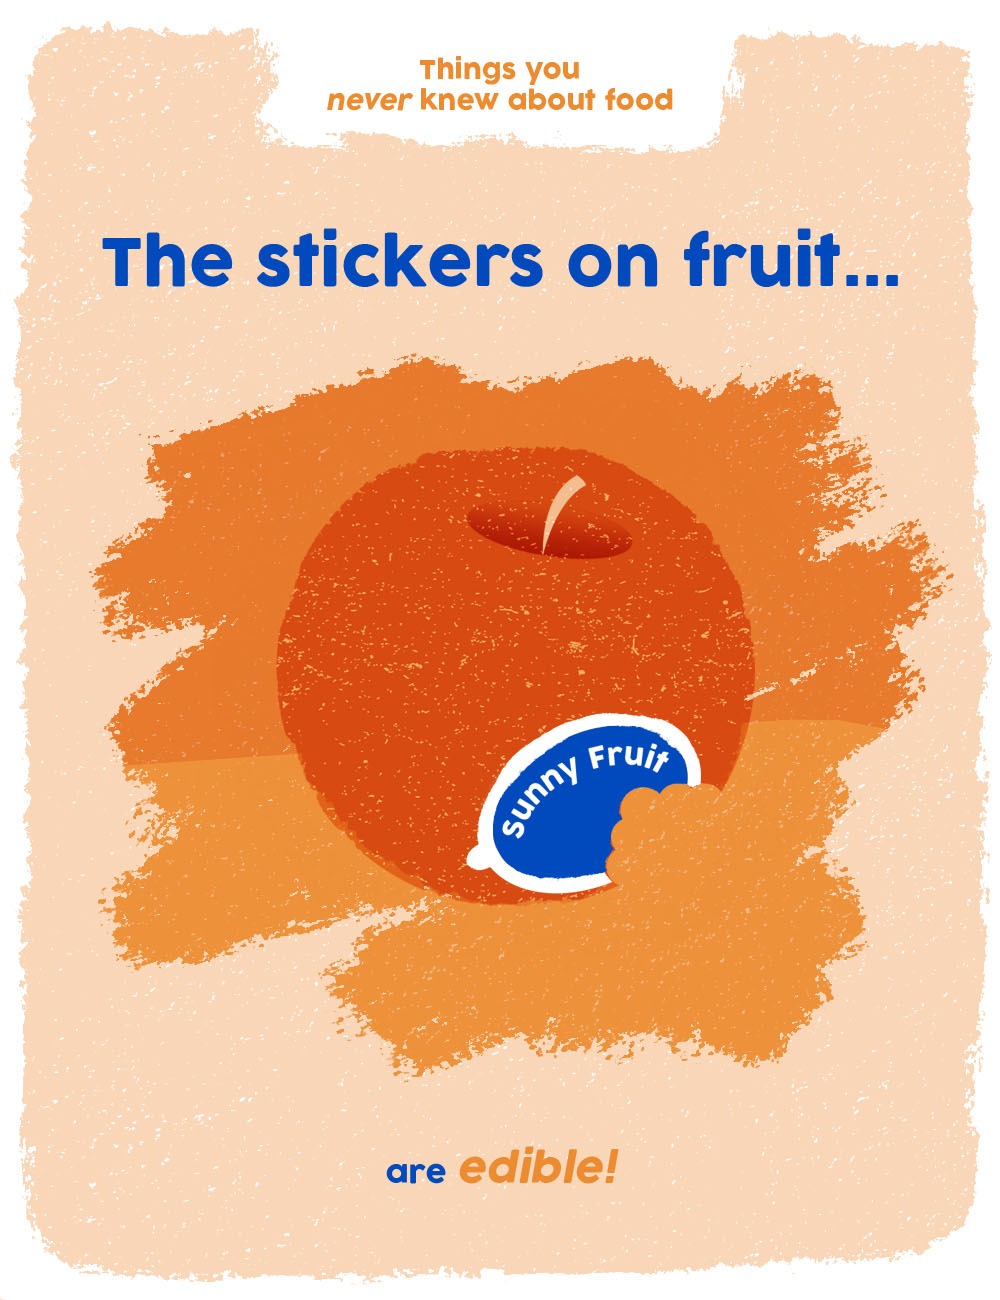 things you never knew about food graphics - fruit stickers are edible